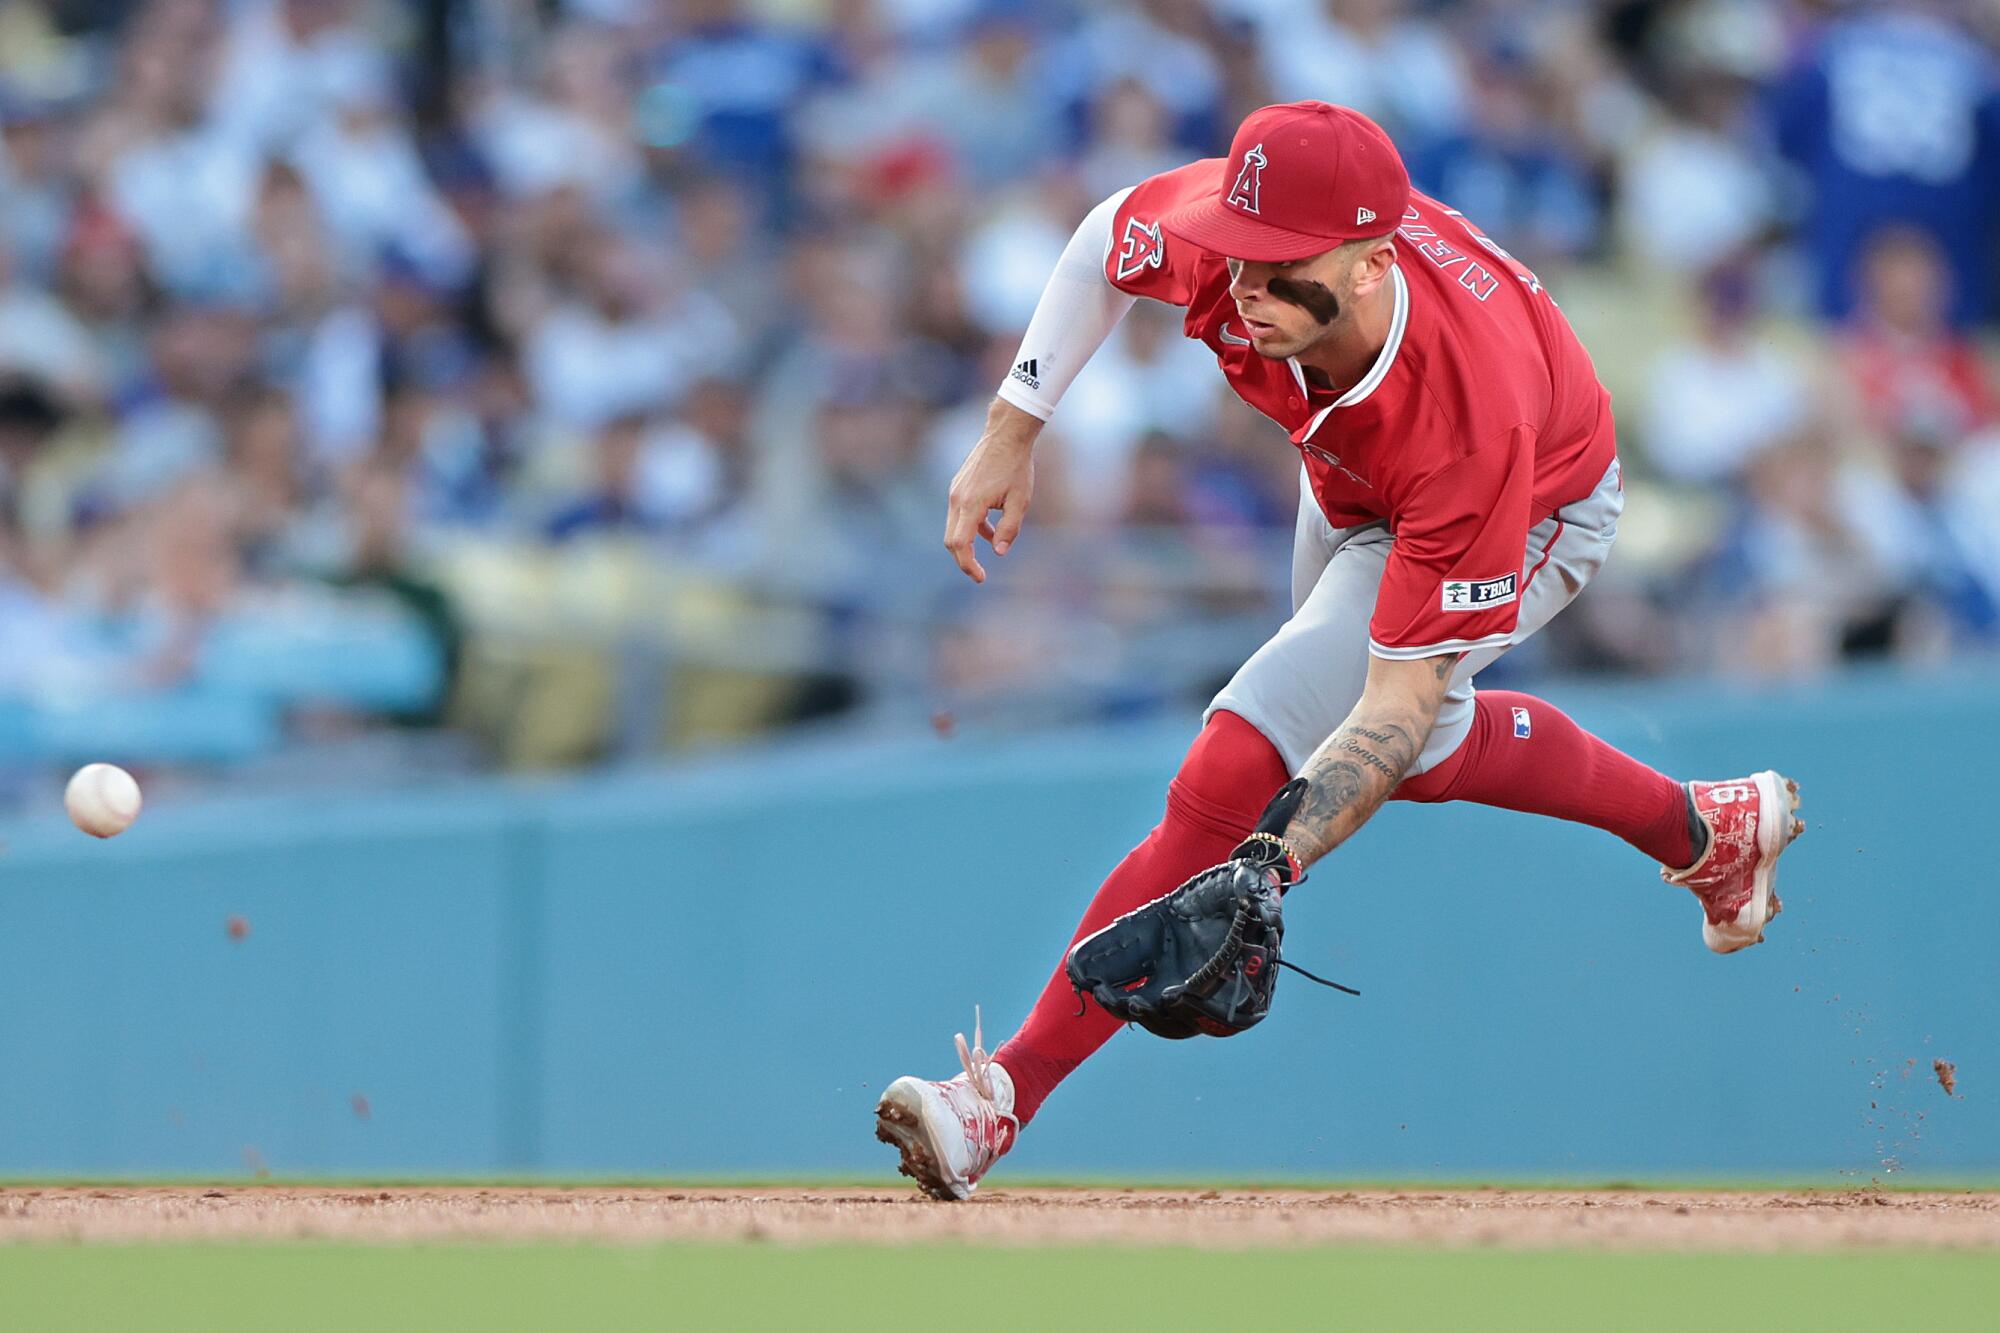 Angels shortstop Zach Neto fields a ball during a 3-2 win over the Dodgers on Friday night.